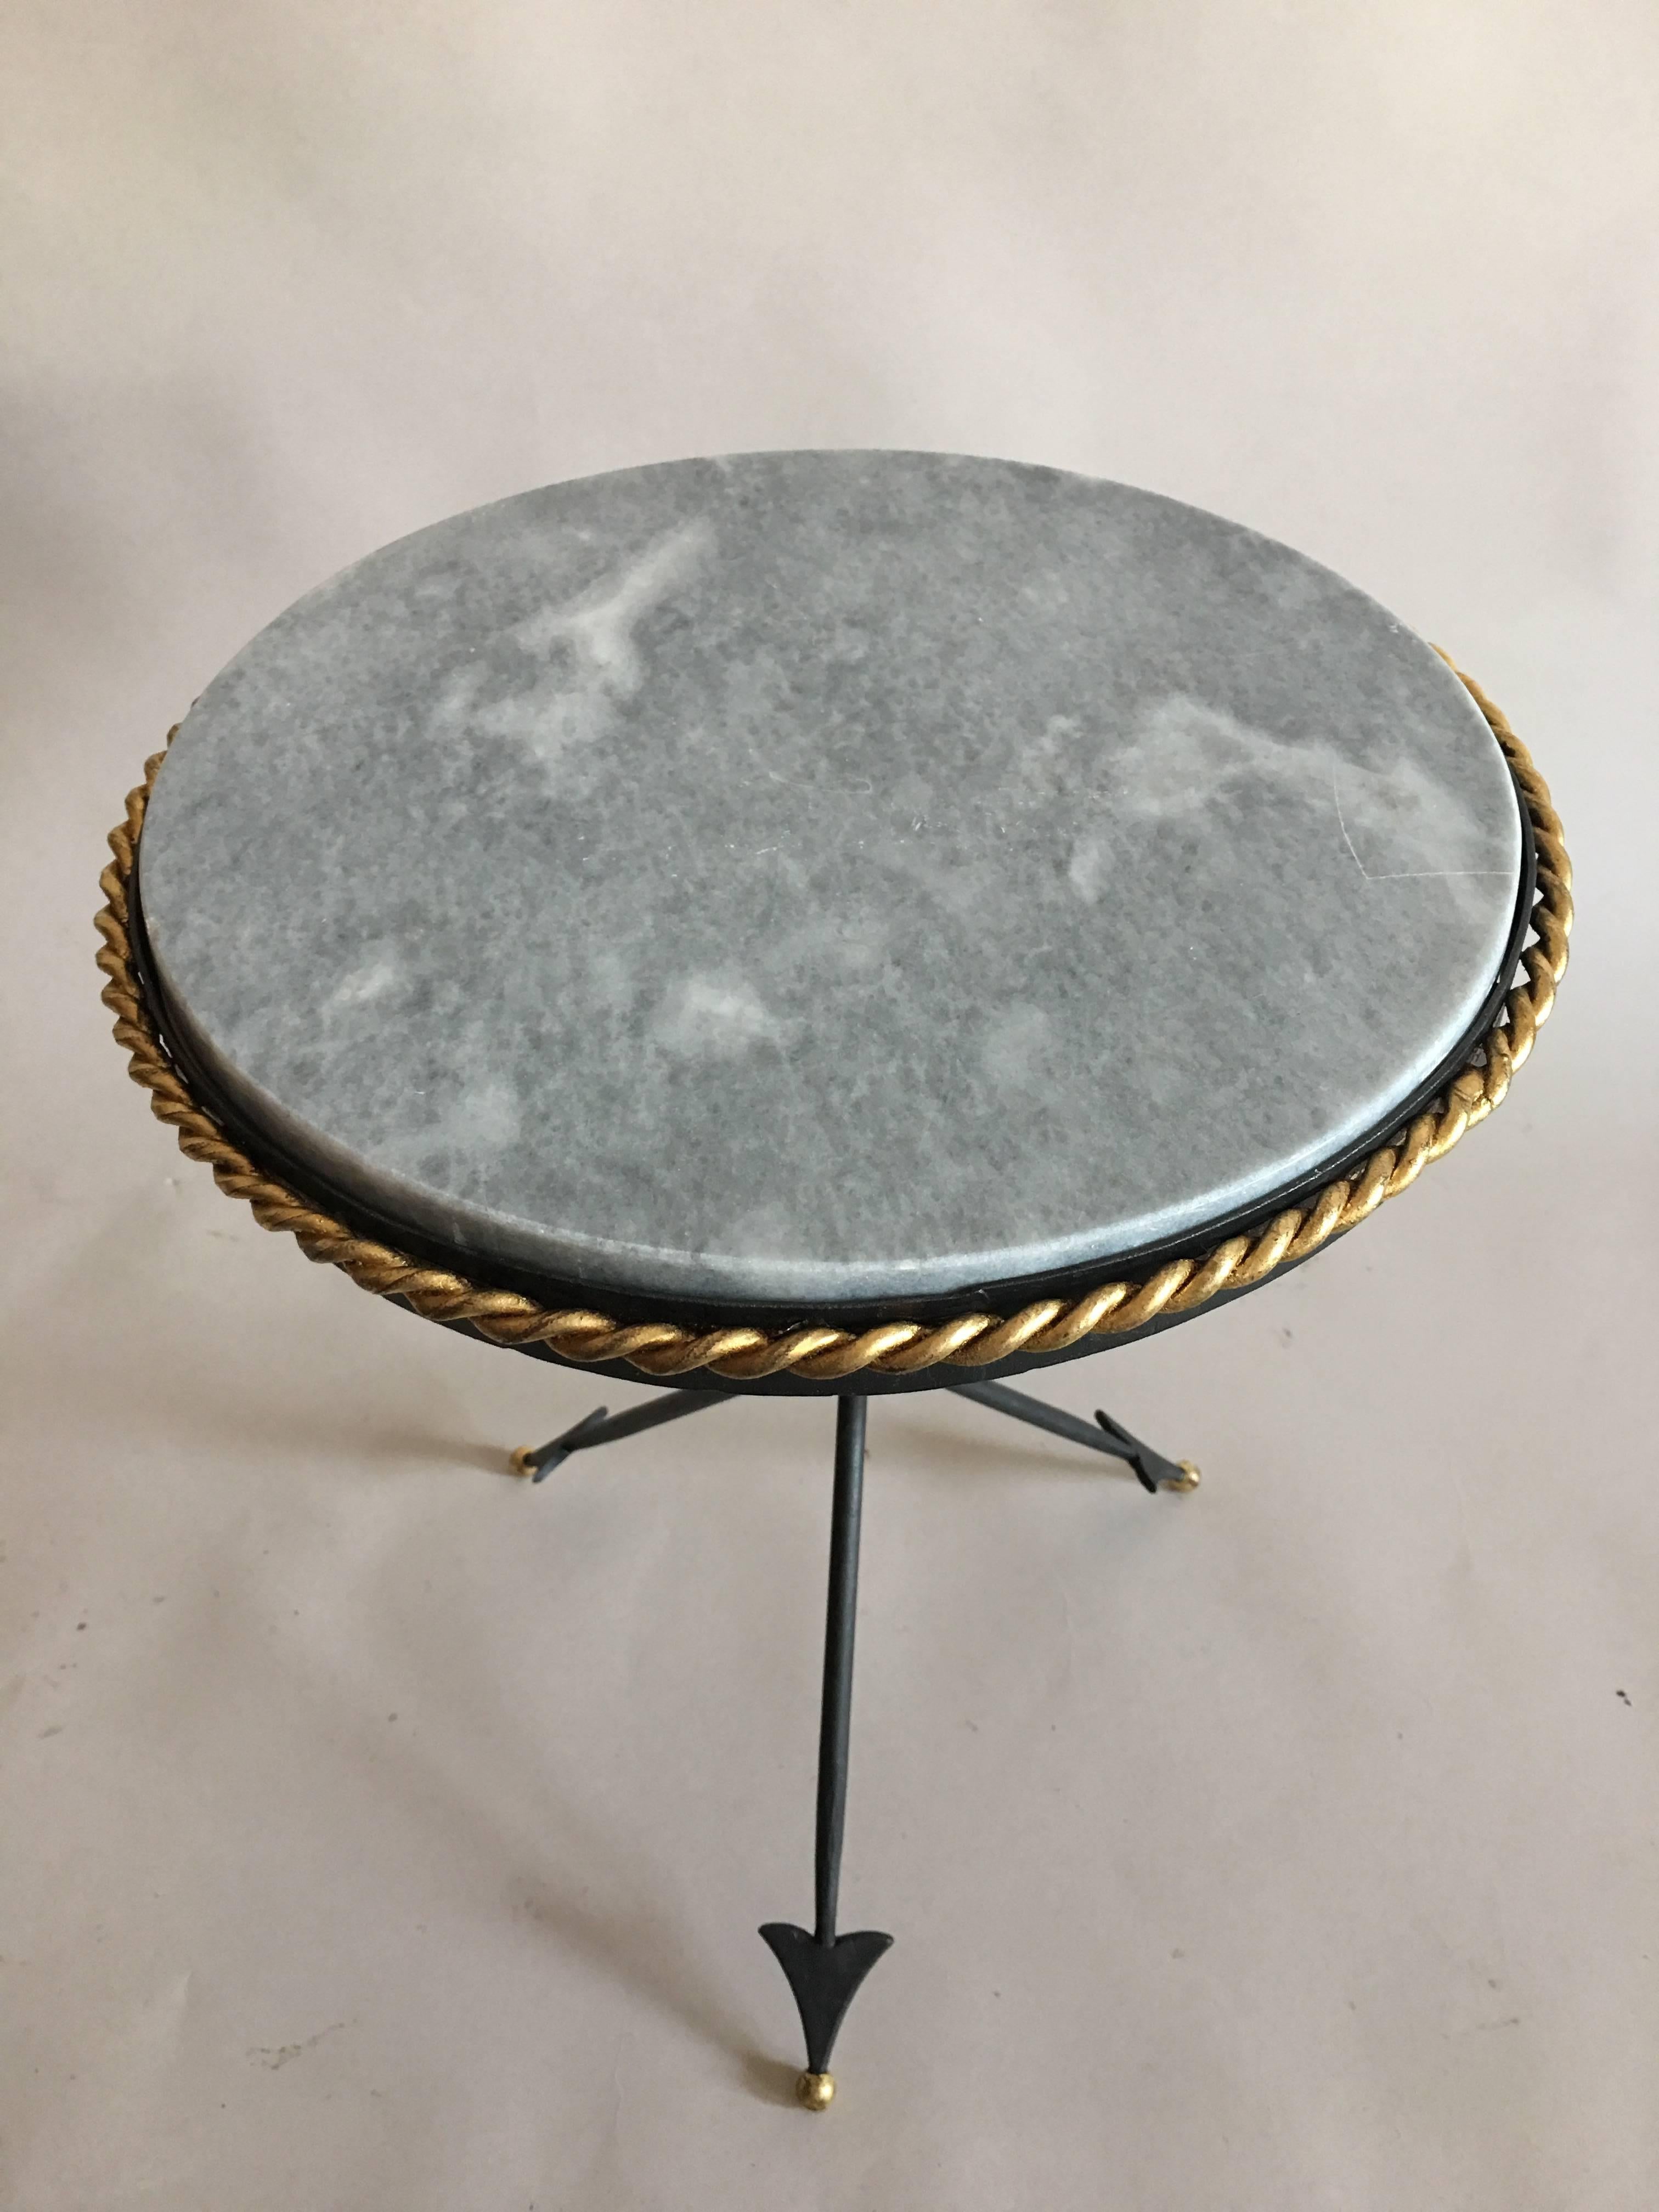 Forged Pair of French Mid-Century Modern Neoclassical Gilt Iron and Marble Side Tables For Sale